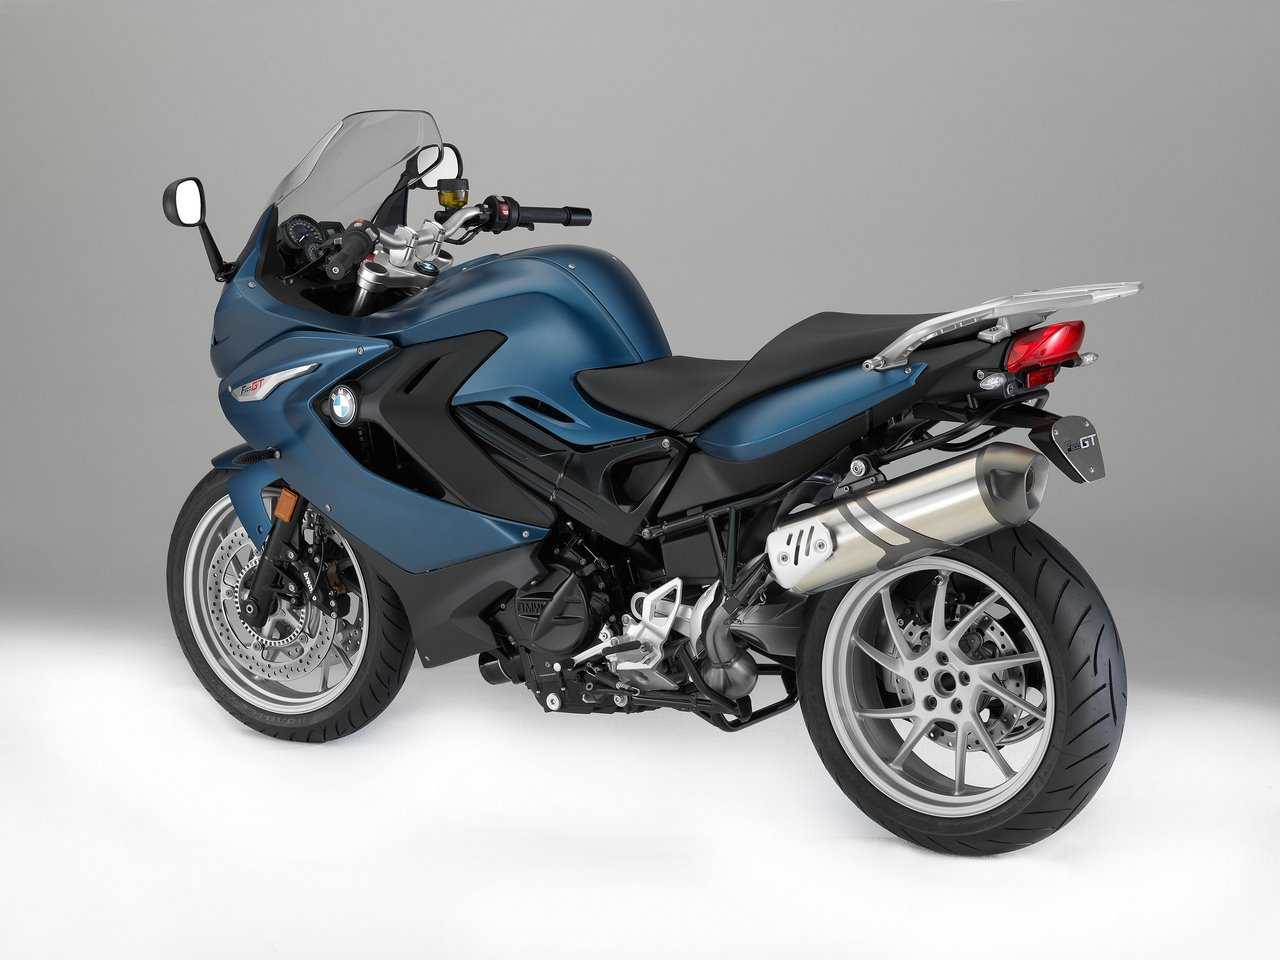 Bmw f800gt (2013-2020) review | owner & expert ratings | mcn